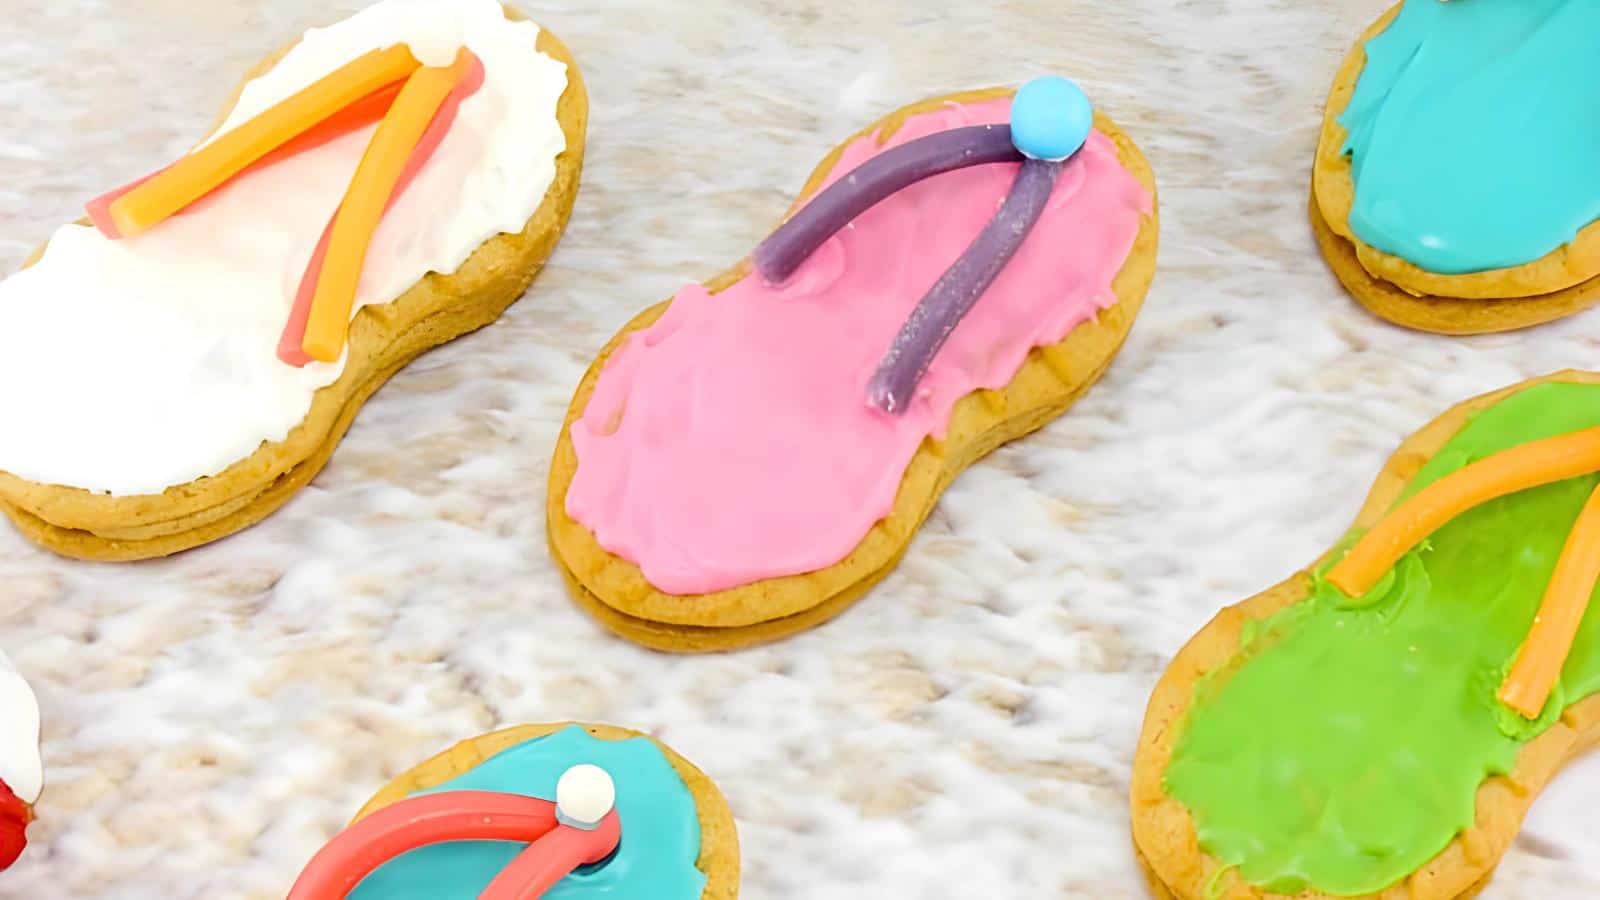 <p>These adorable flip-flop cookies add a playful touch to any pool party, transforming a simple treat into a themed delight. They’re easy to make and decorate, providing a fun activity that can also involve the kids. Perfect for a sweet snack, they bring smiles and enjoyment to the dessert table. With just a few ingredients, you can create these eye-catching cookies in no time. They’re a sweet way to celebrate the summer vibes at your poolside gathering.<br><strong>Get the Recipe: </strong><a href="https://www.ohmy-creative.com/kitchen/dessert/how-to-make-nutter-butter-flip-flop-cookies/?utm_source=msn&utm_medium=page&utm_campaign=msn" rel="noopener">How To Make Nutter Butter Flip Flop Cookies</a></p>